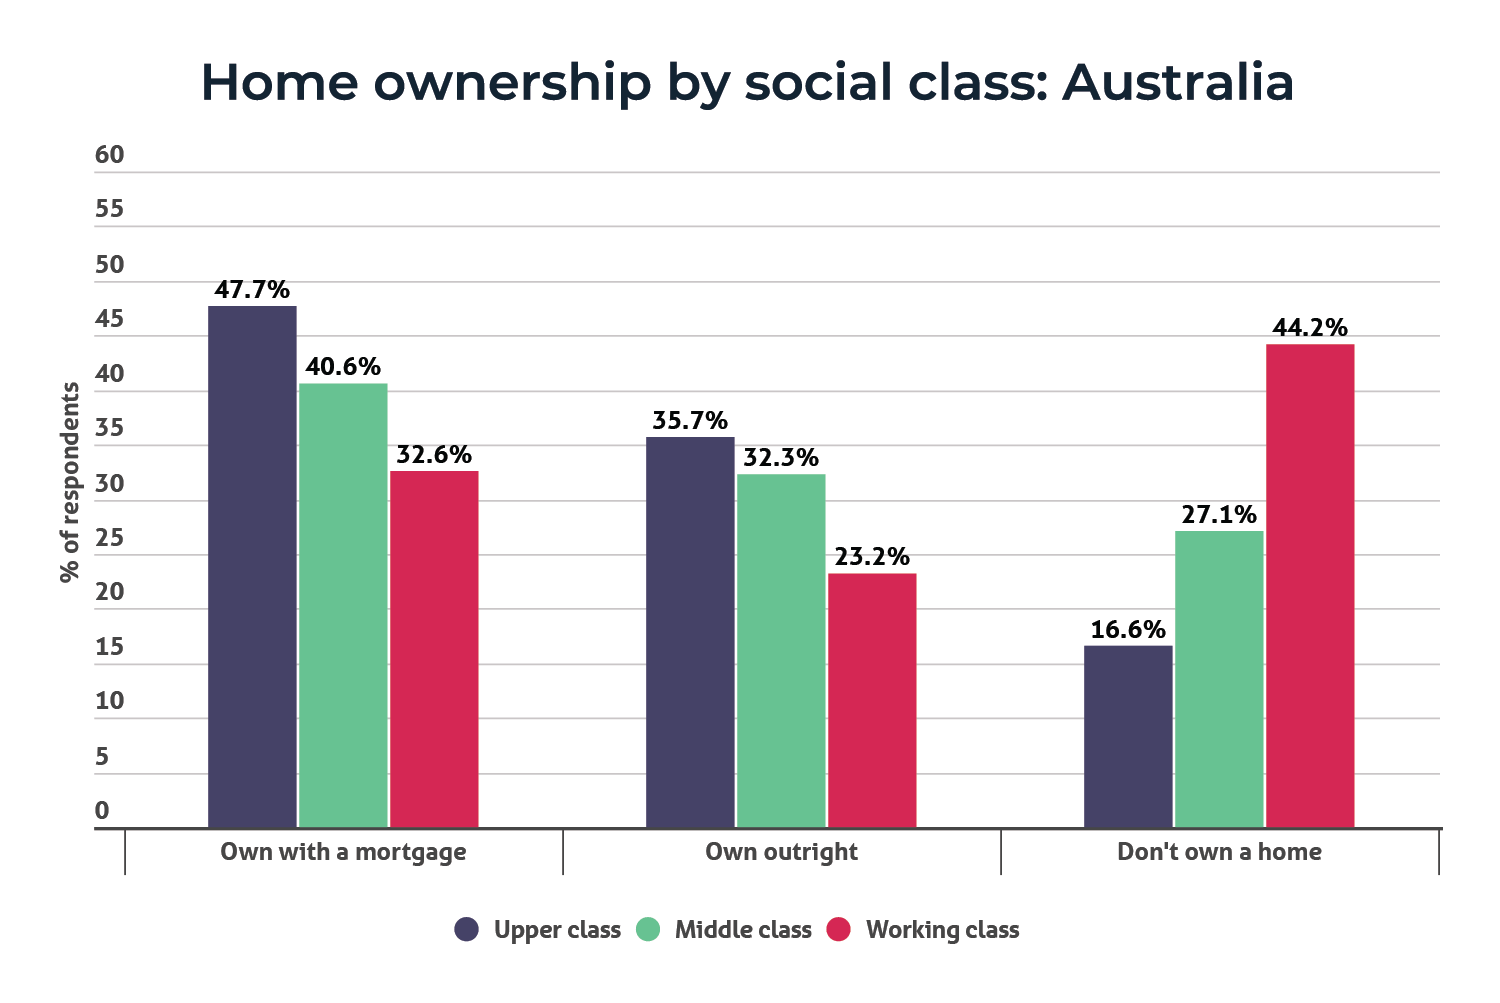 a bar chart showing home ownership rates in Australia by social class